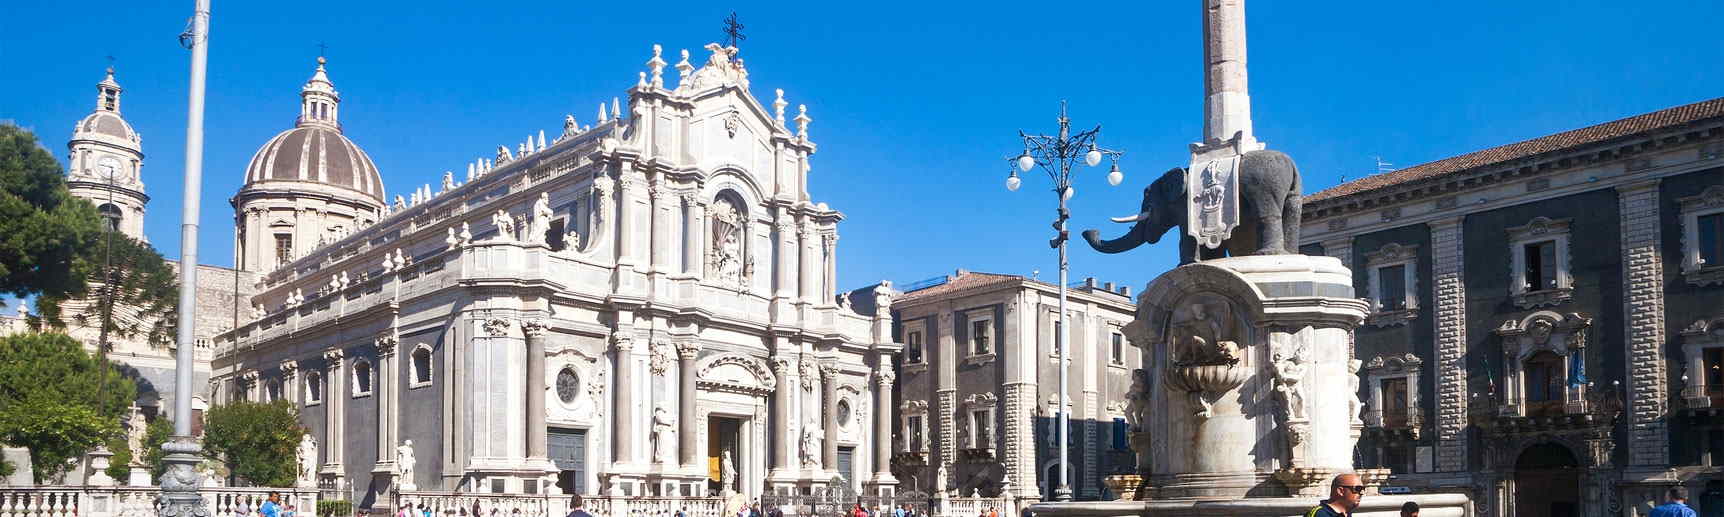 View of the duomo in Catania, Sicily.